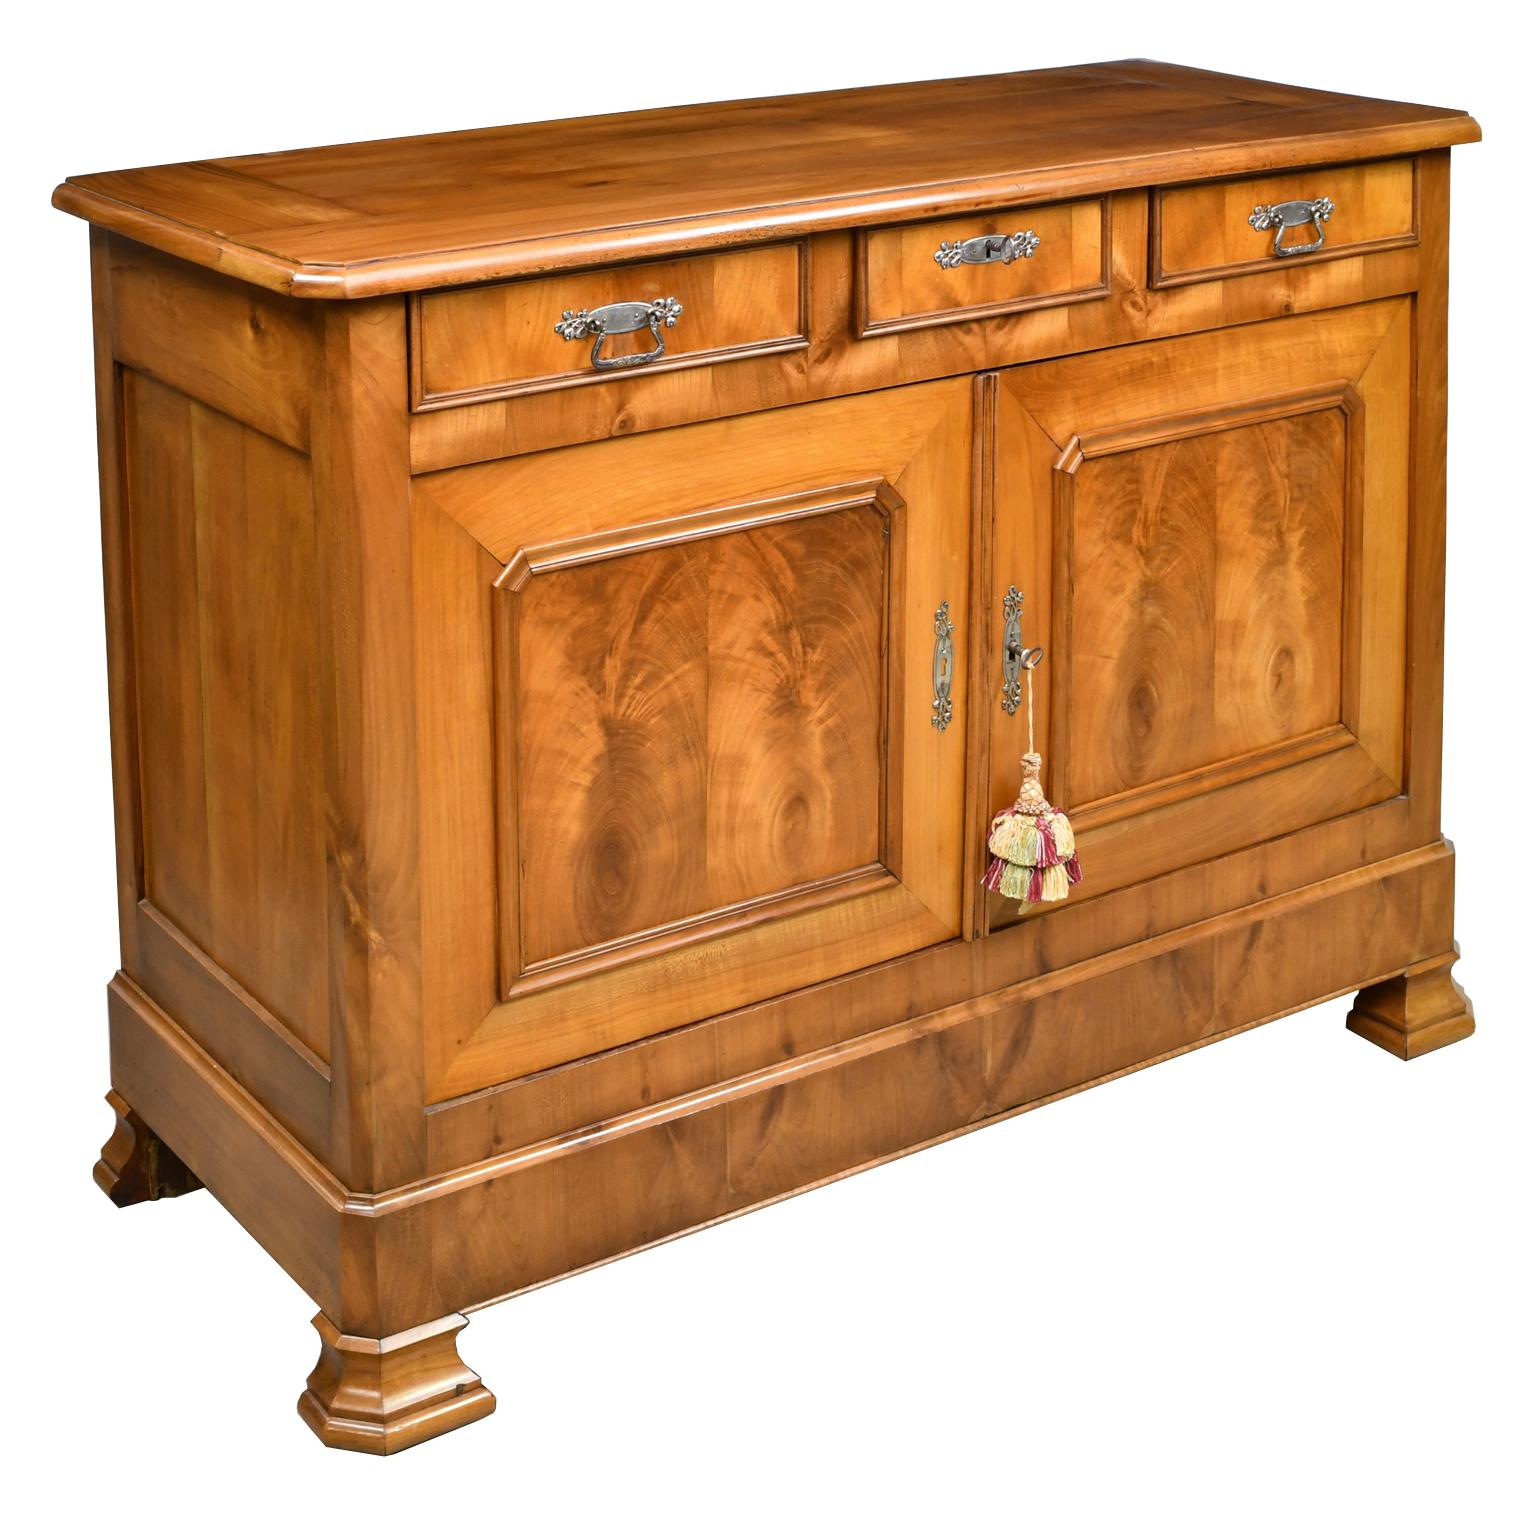 A Louis Philippe buffet in beautiful cherrywood with three drawers over two doors that open to a cabinet with storage area with 1 shelf. Cabinet rests on original ogee faceted feet, France, circa 1840.
Measures: 54 1/4 wide x 21 1/2 deep x 39 1/4